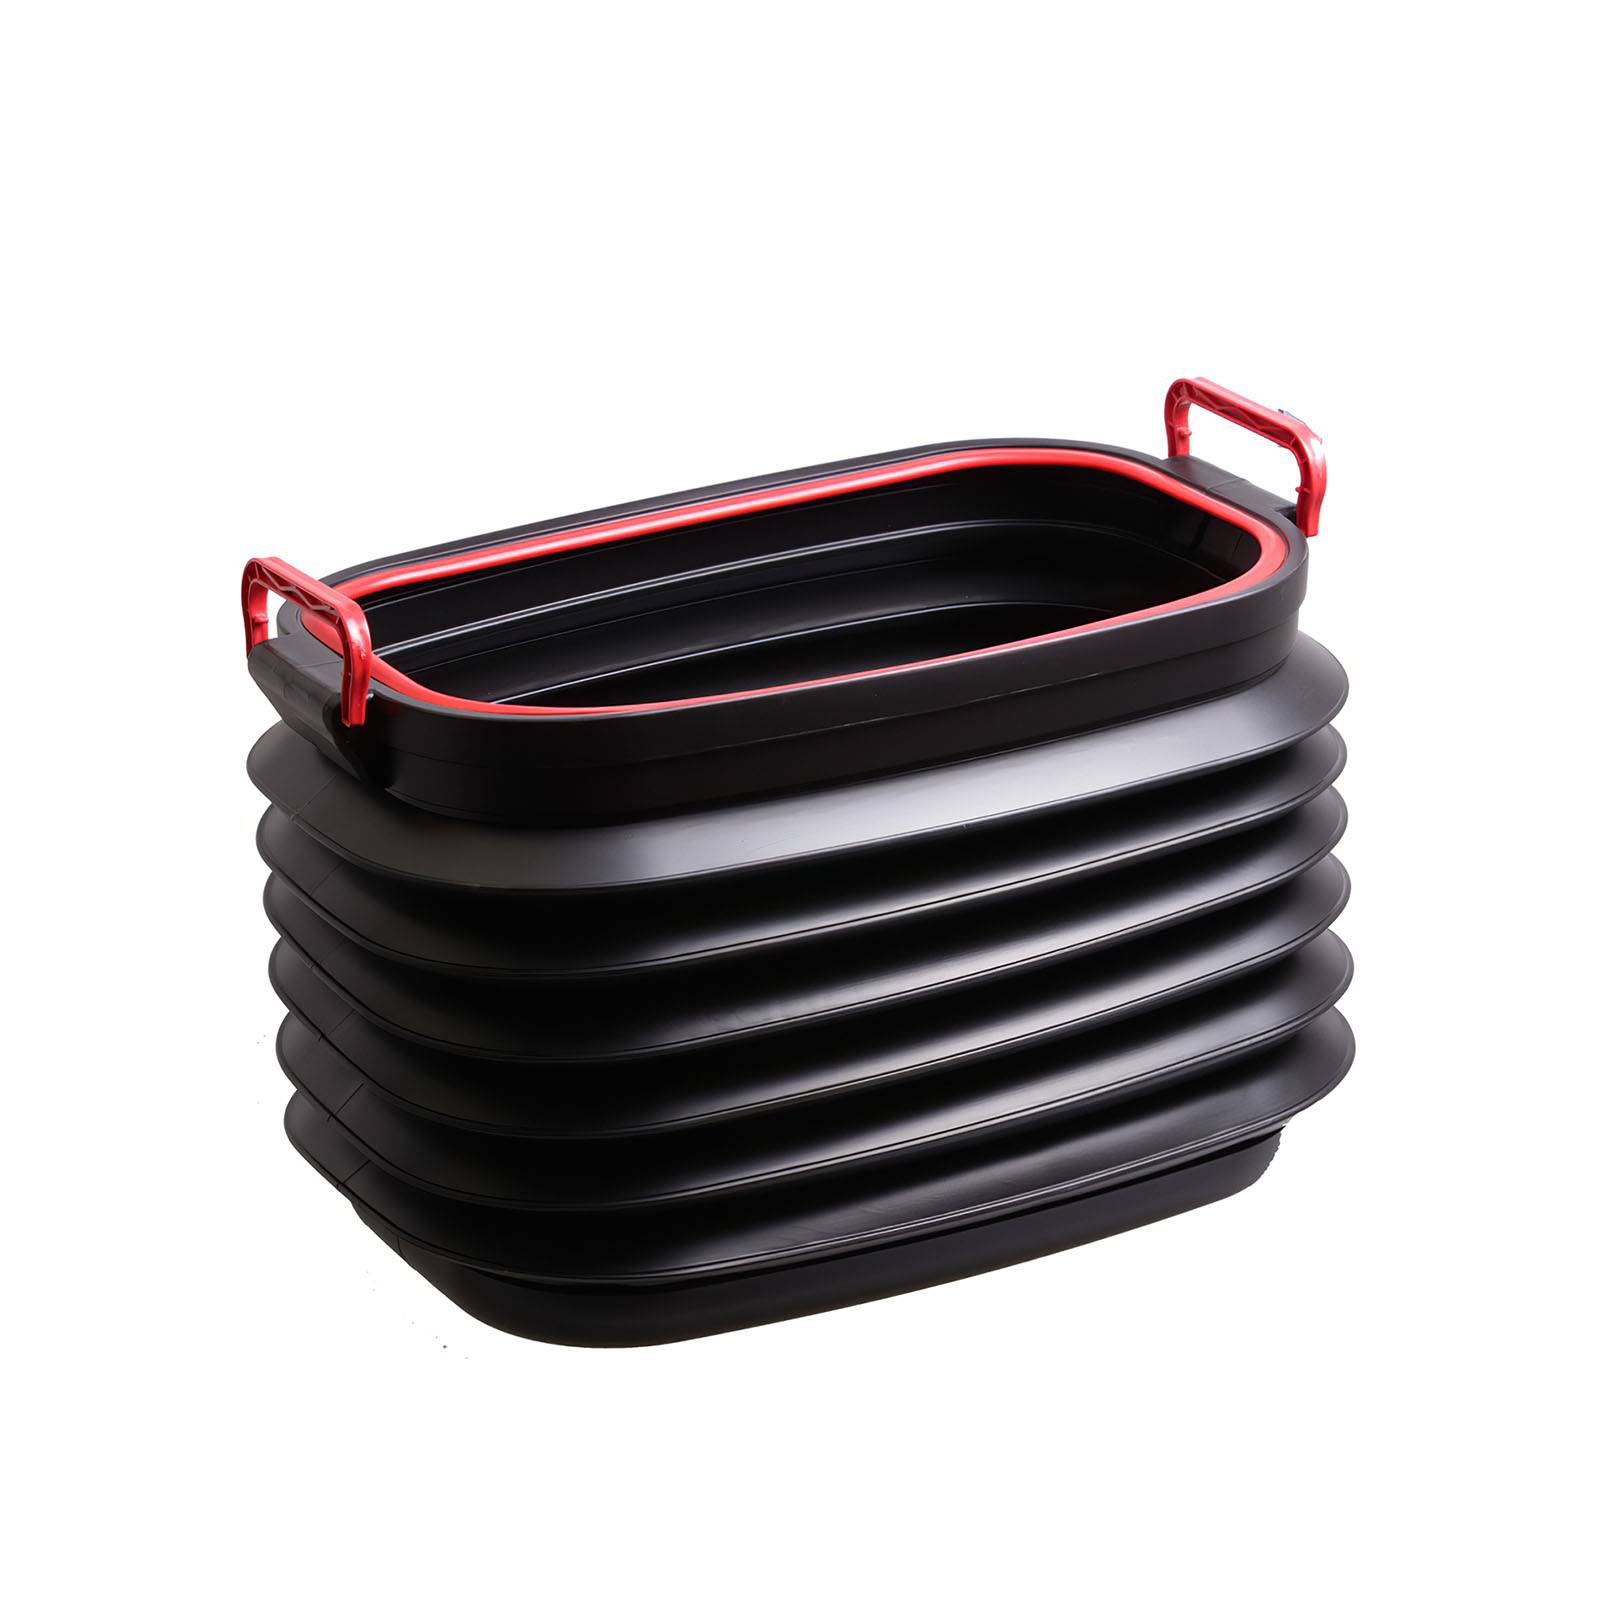 Car Trash Can Portable 18L Car Storage Bucket Black Plastic Foldable Multifunctional Storage Box Waterproof Bag Waste Basket Color Name: Red Ships From: Italy|China|GERMANY|Russian Federation 